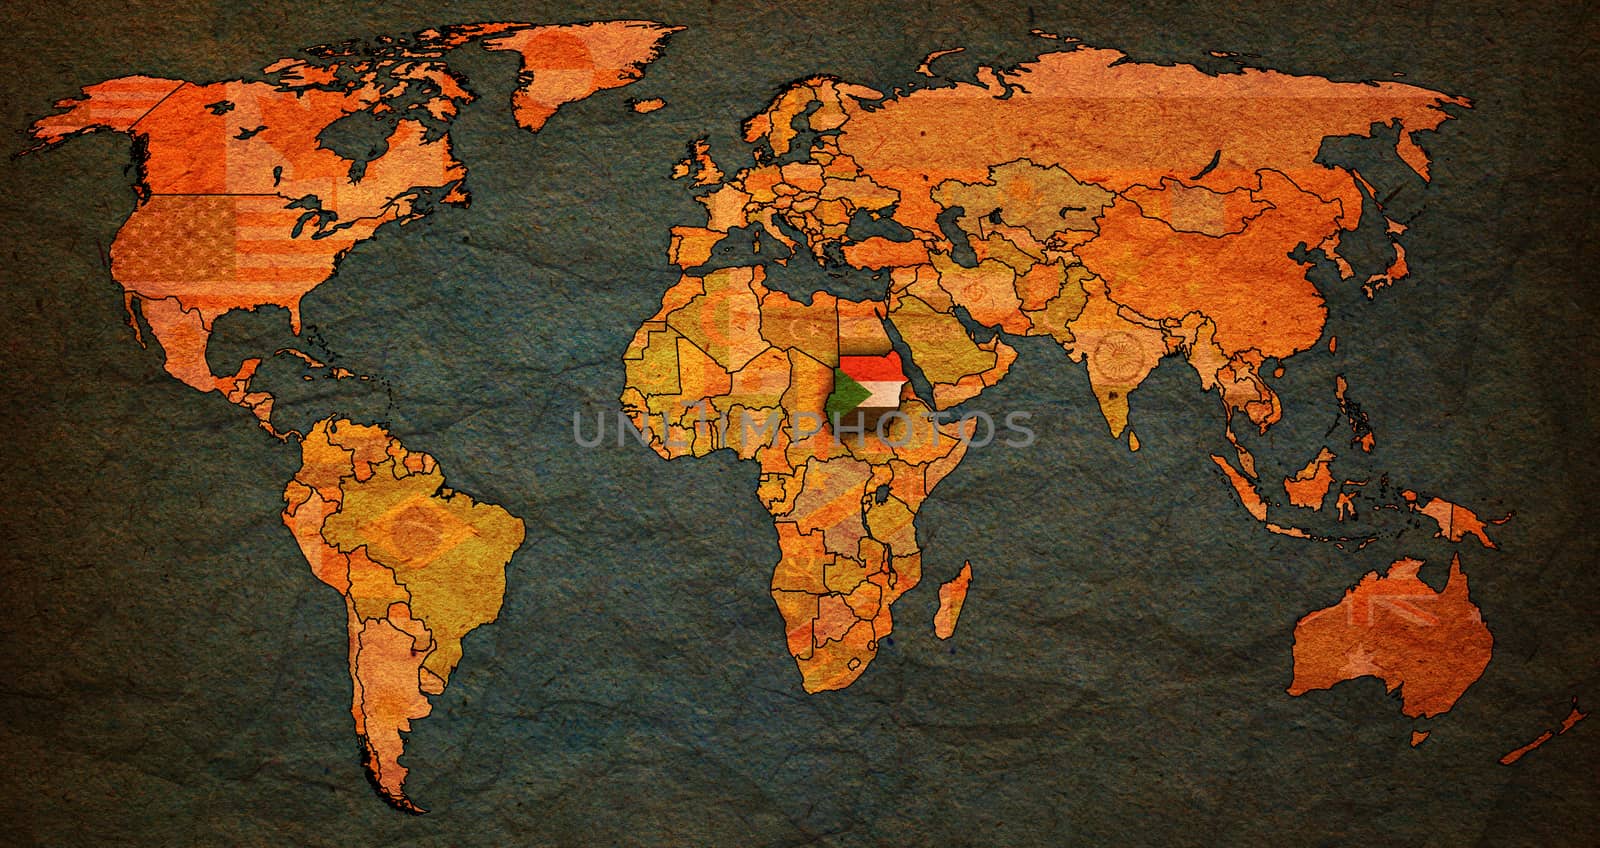 sudan flag on old vintage world map with national borders